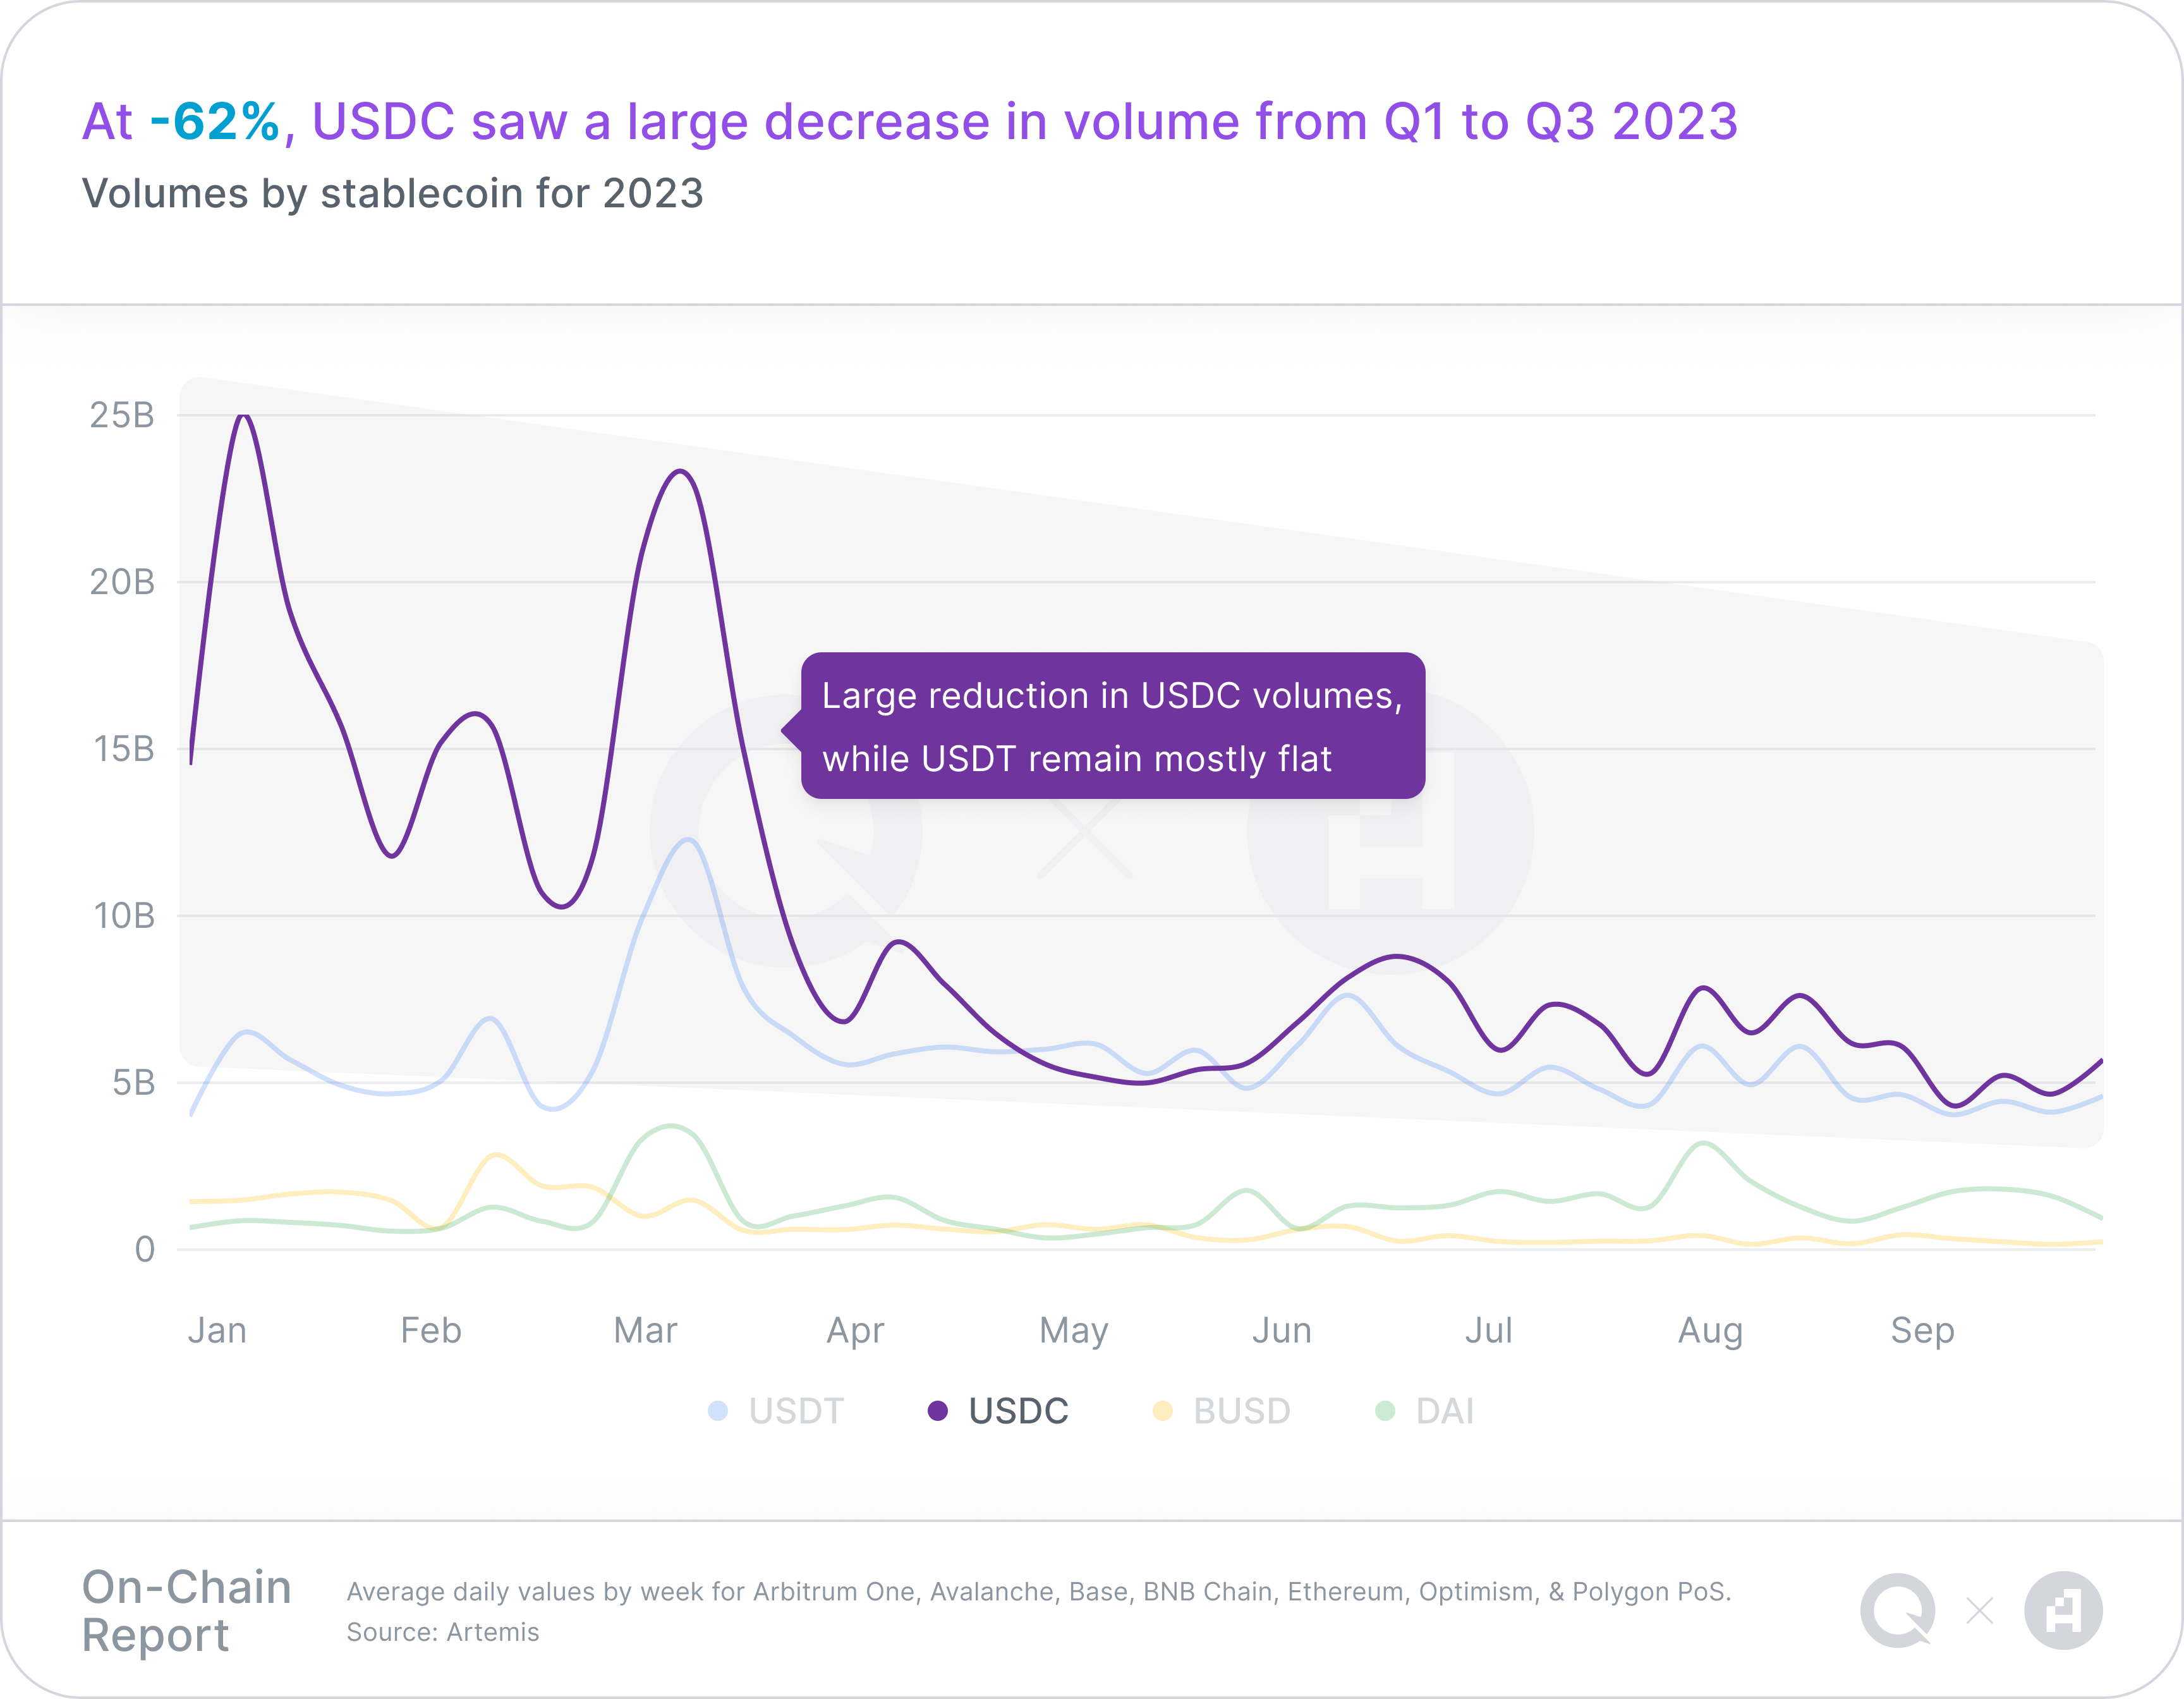 A chart representing volumes by stablecoin for 2023, with a takeaway headline of "At -62%, USDC saw a large decrease in volume from Q1 to Q3 2023"